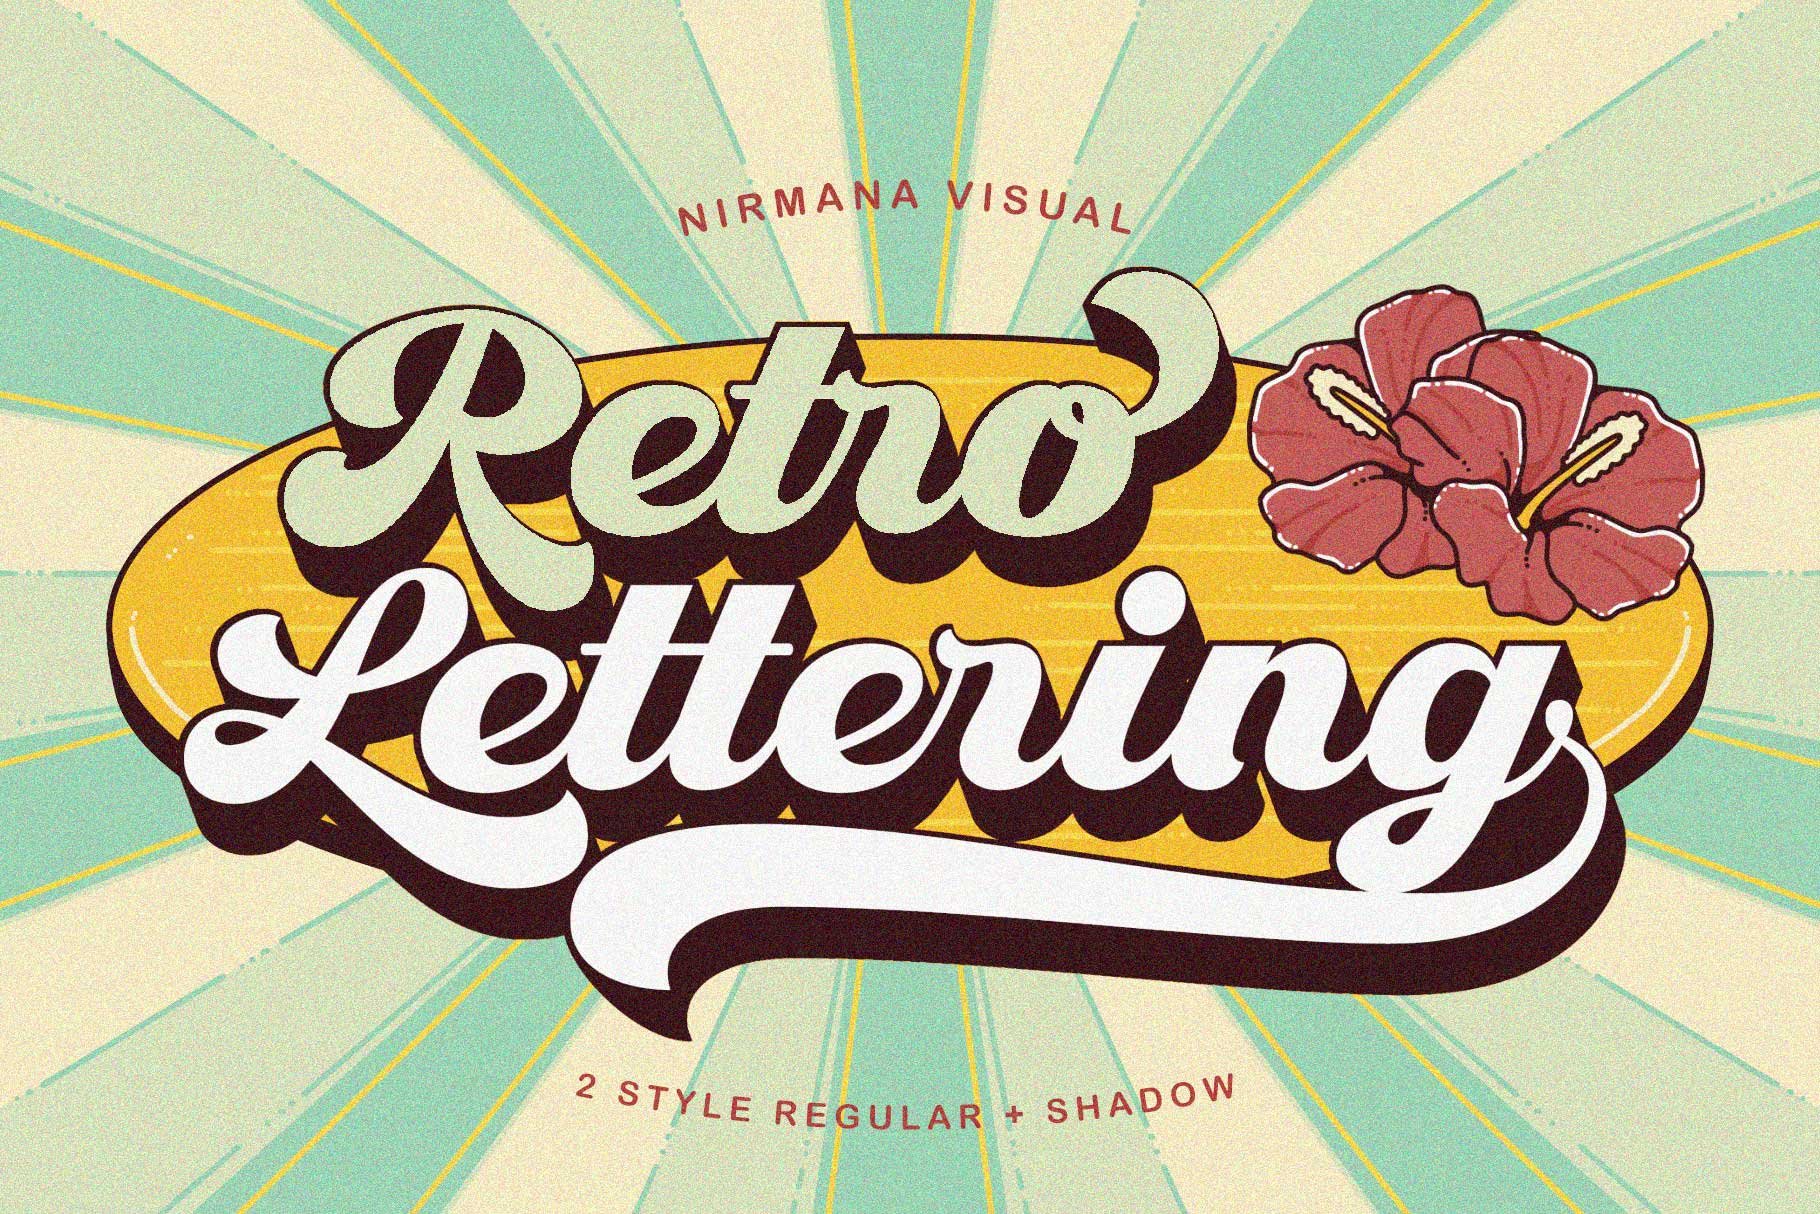 Retro Lettering - Groovy font cover image.